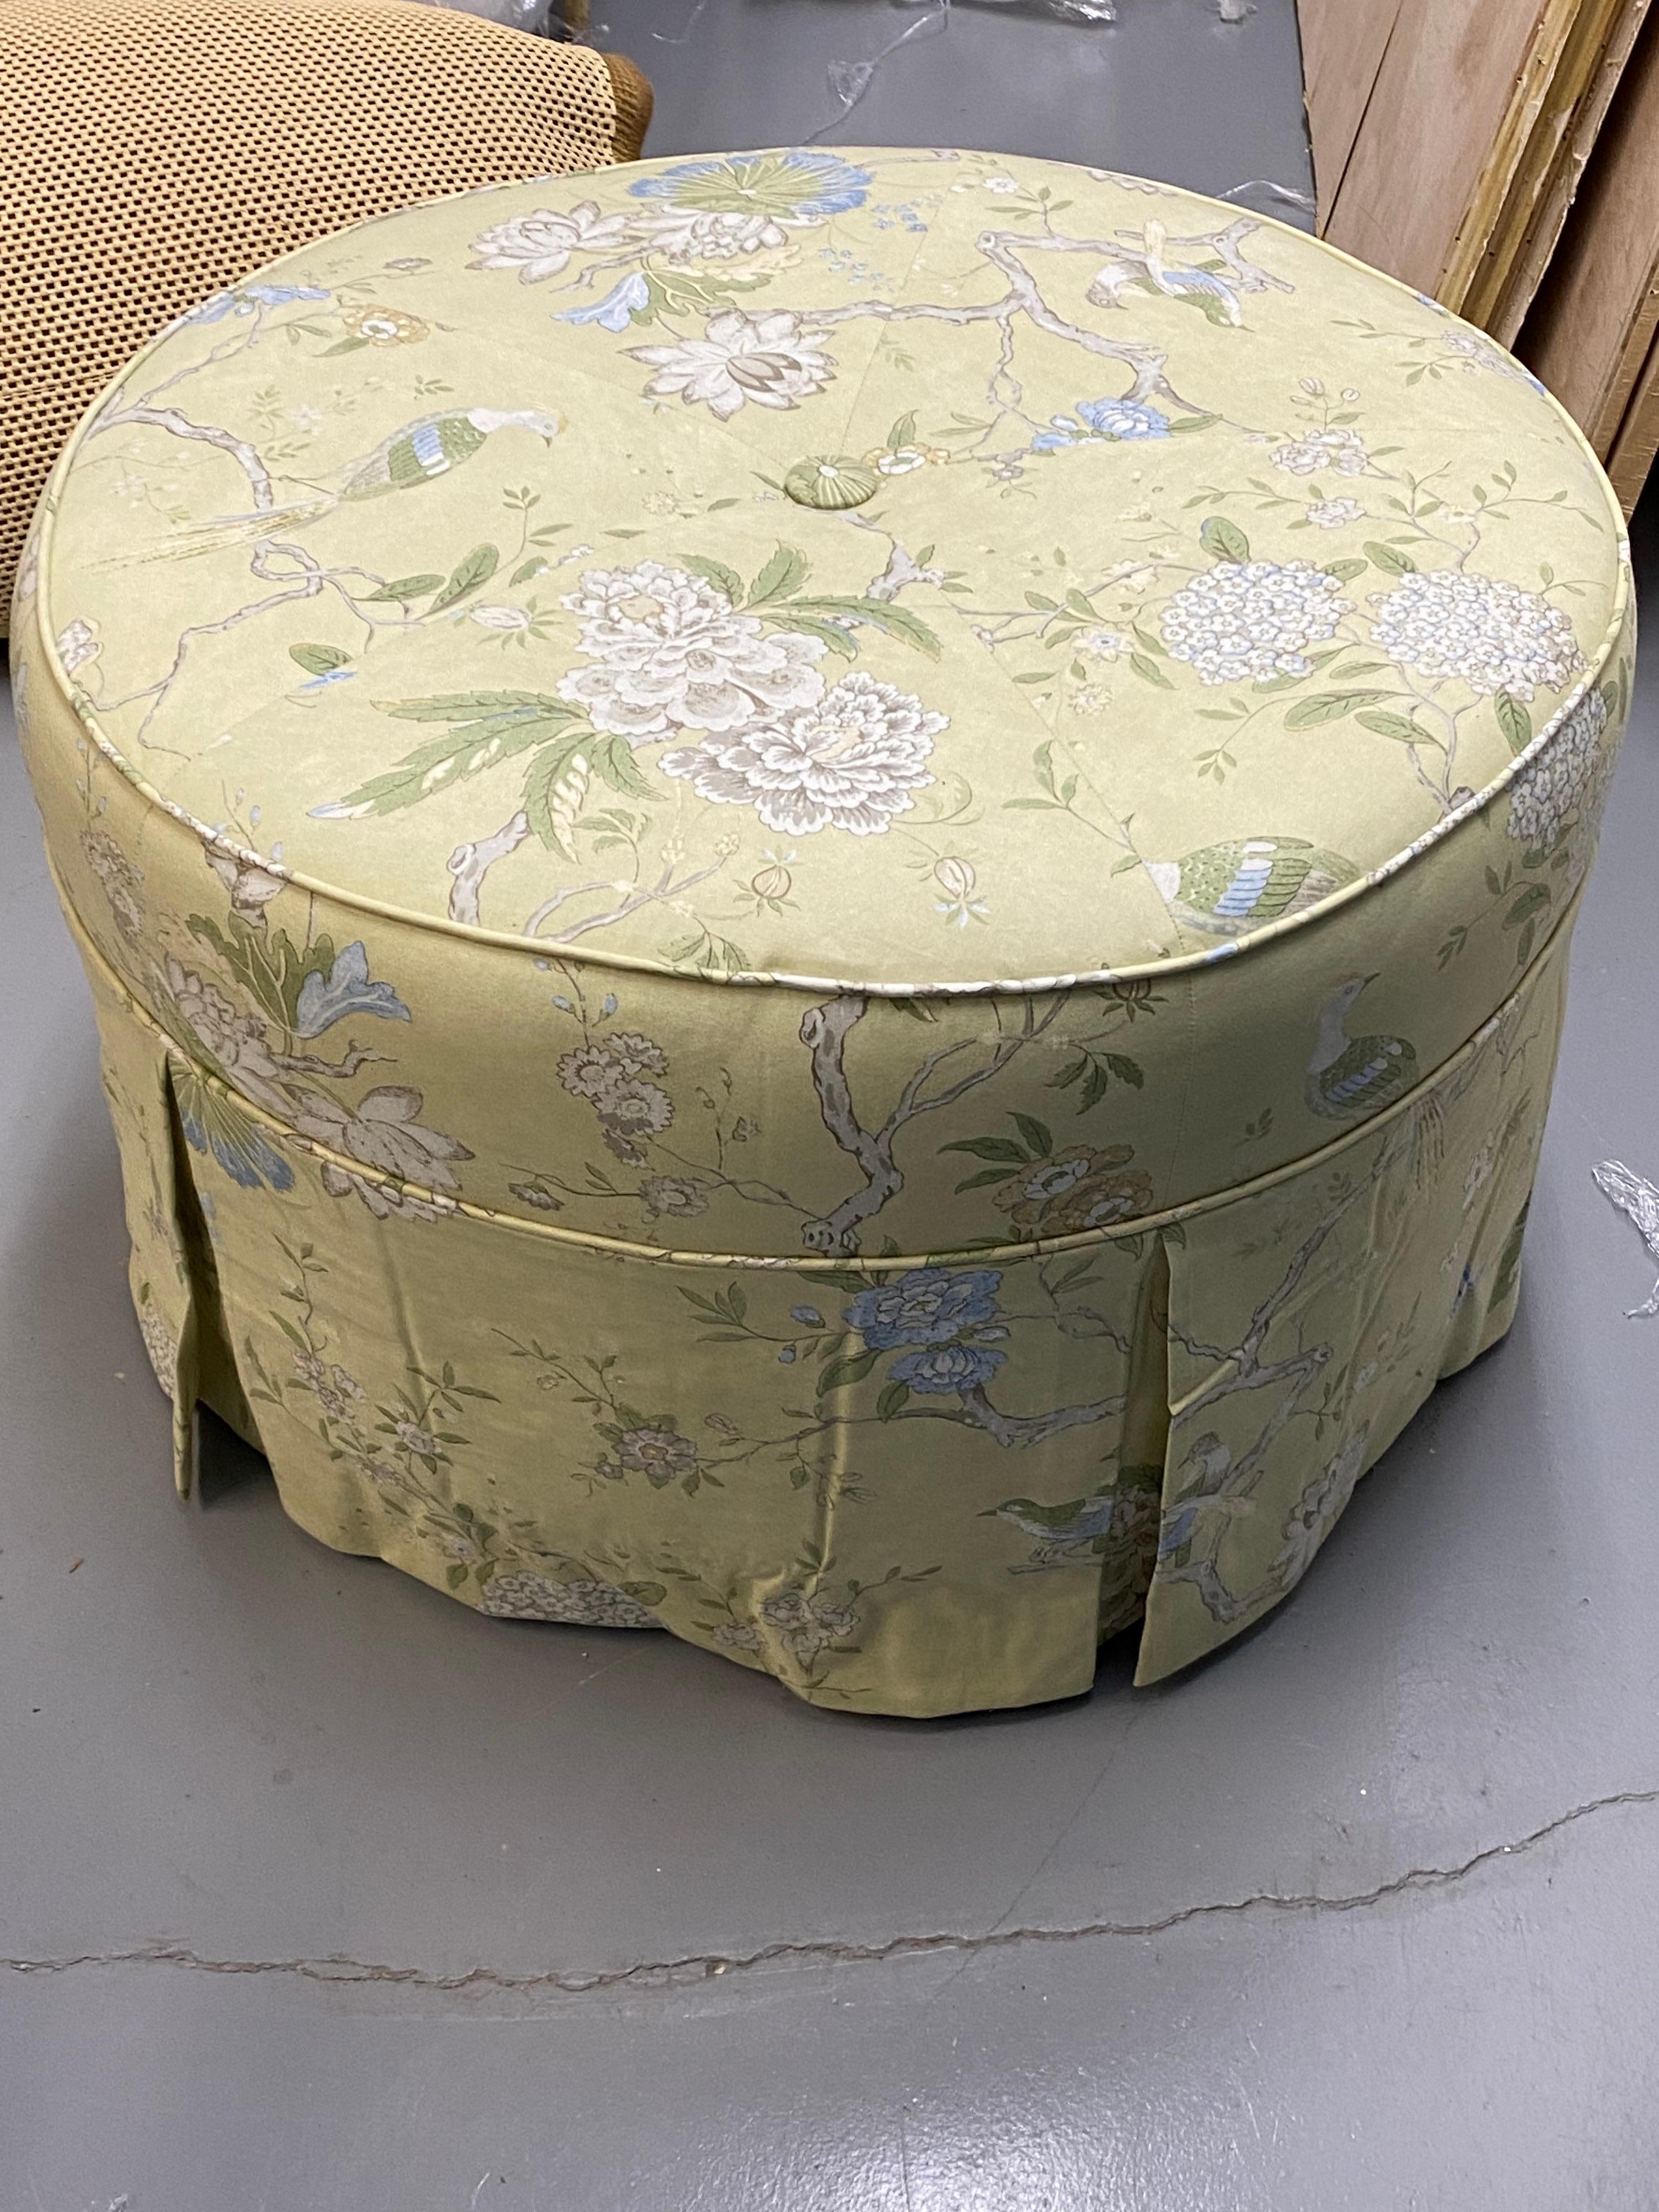 Round Upholstered Pouf Ottoman in Yellow Chinoiserie Cotton Fabric
Upholstered in a bright greeny-yellow cotton chinoiserie fabric. A single center button, and kick pleated skirt.
Upholstery in good overall condition, with light fading, skirt